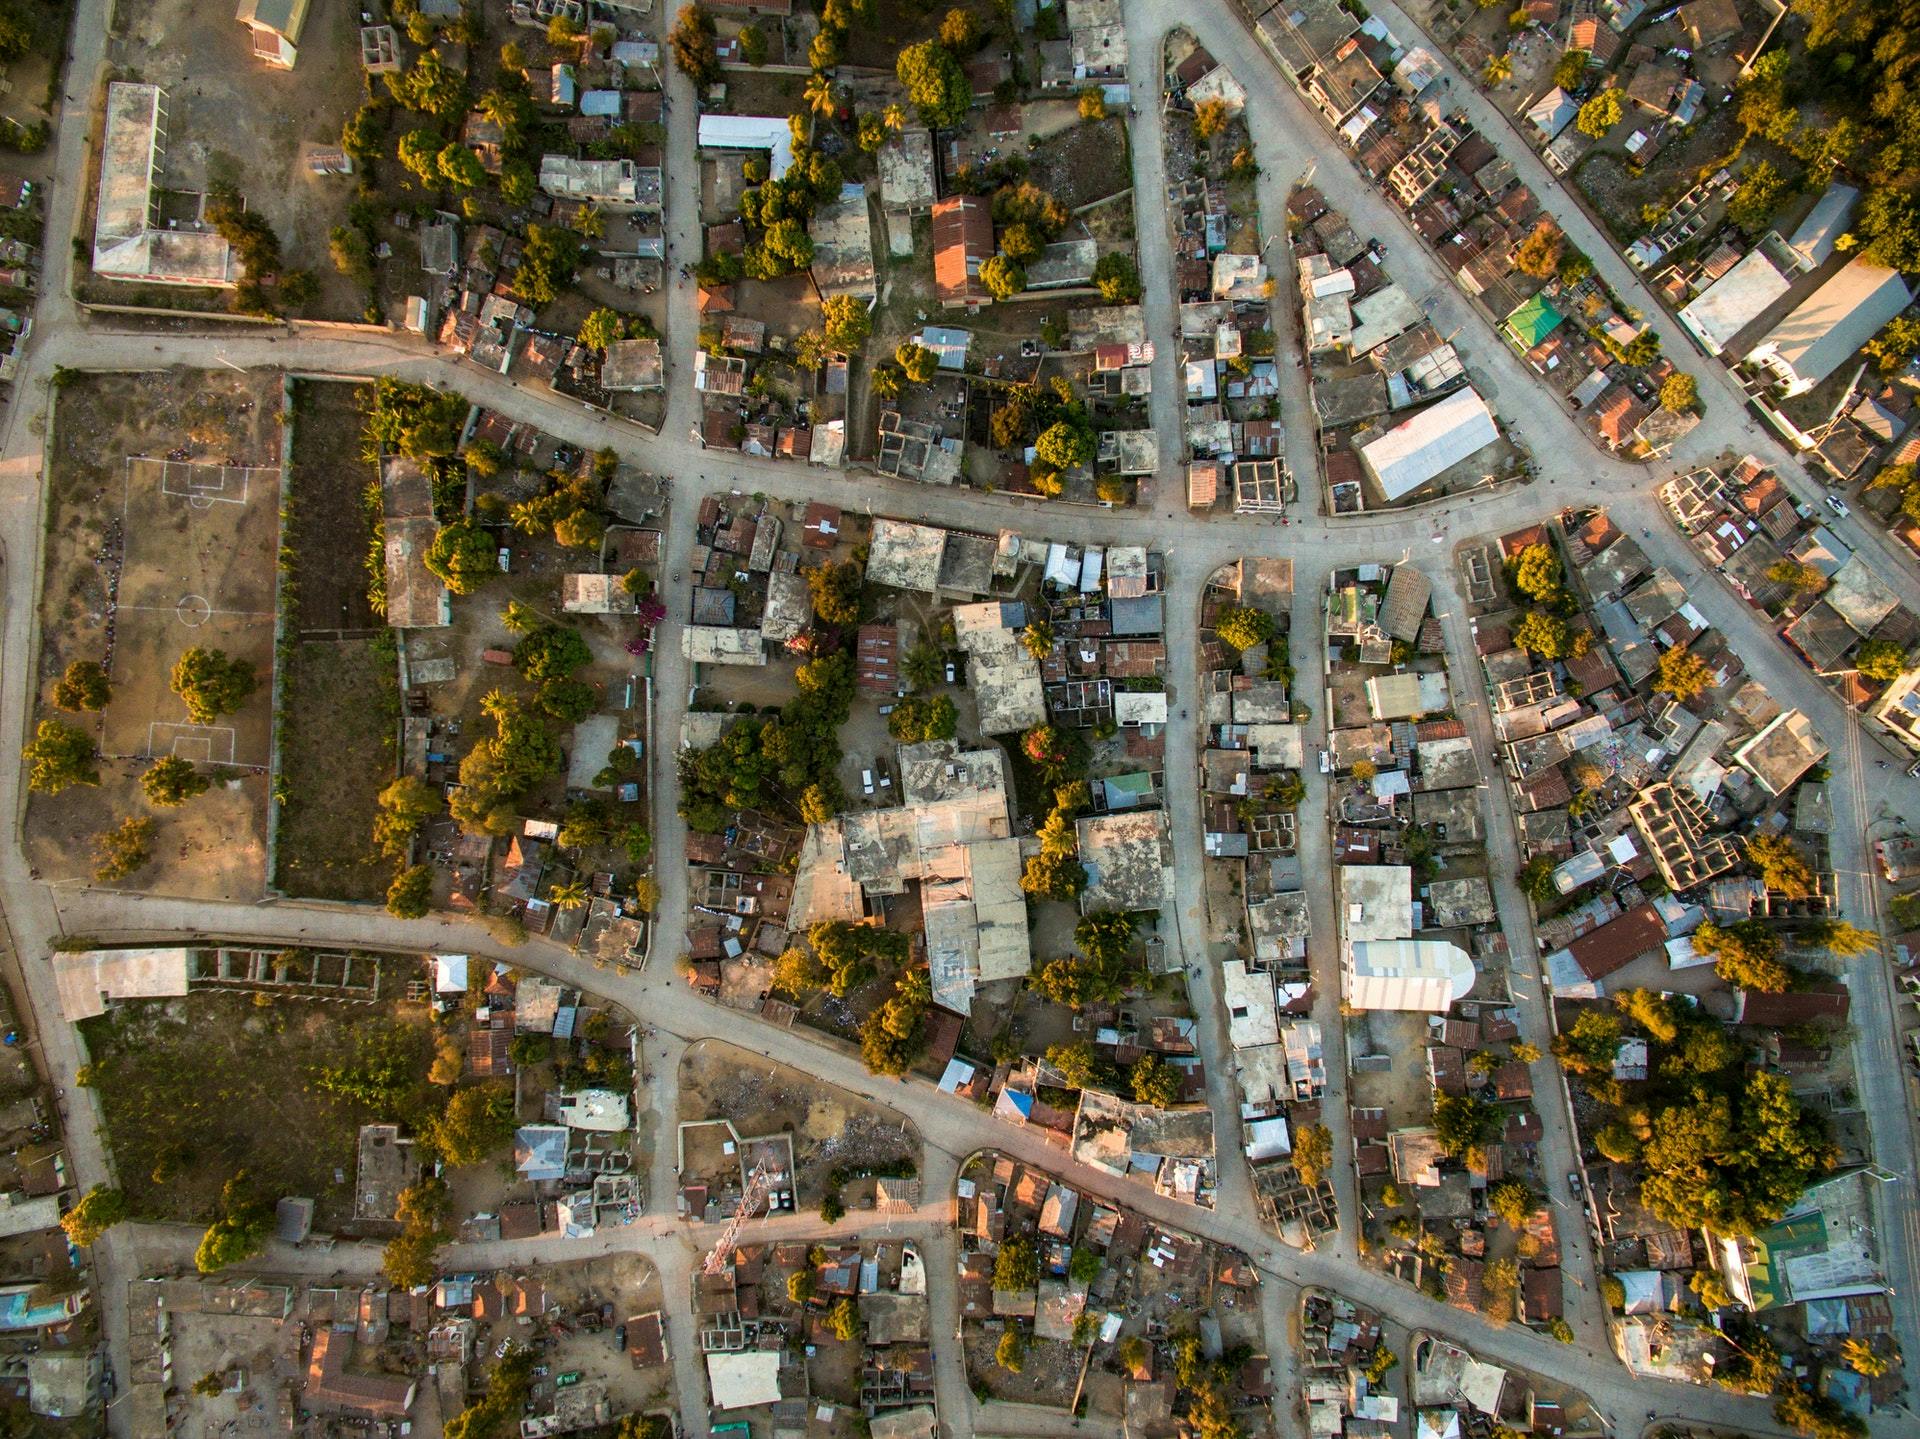 A neighbourhood with houses and streets in Haiti seen from the sky.